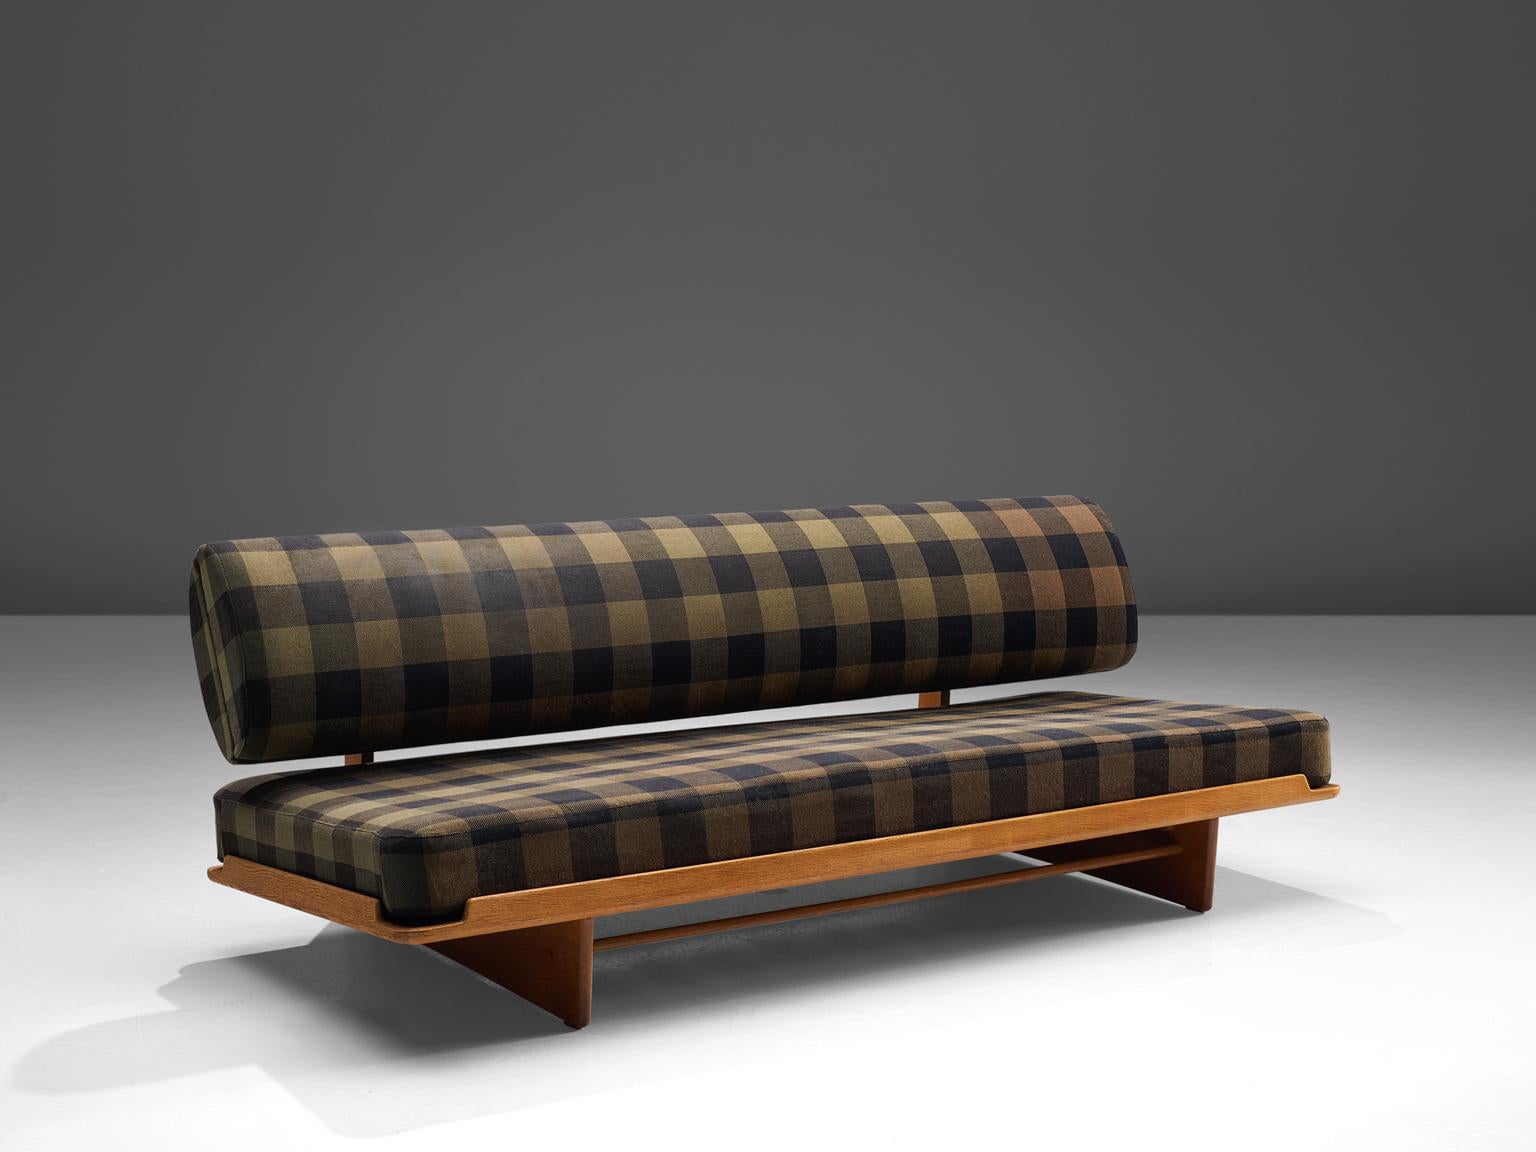 Grete Jalk for P. Jeppesen, sofa, oak, fabric upholstery, Denmark, 1960s

This sofa is designed by Grete Jalk in the 1960s. It features not only a beautiful designed shape but also has hidden storage space in the oval backrest. A wooden frame in oak